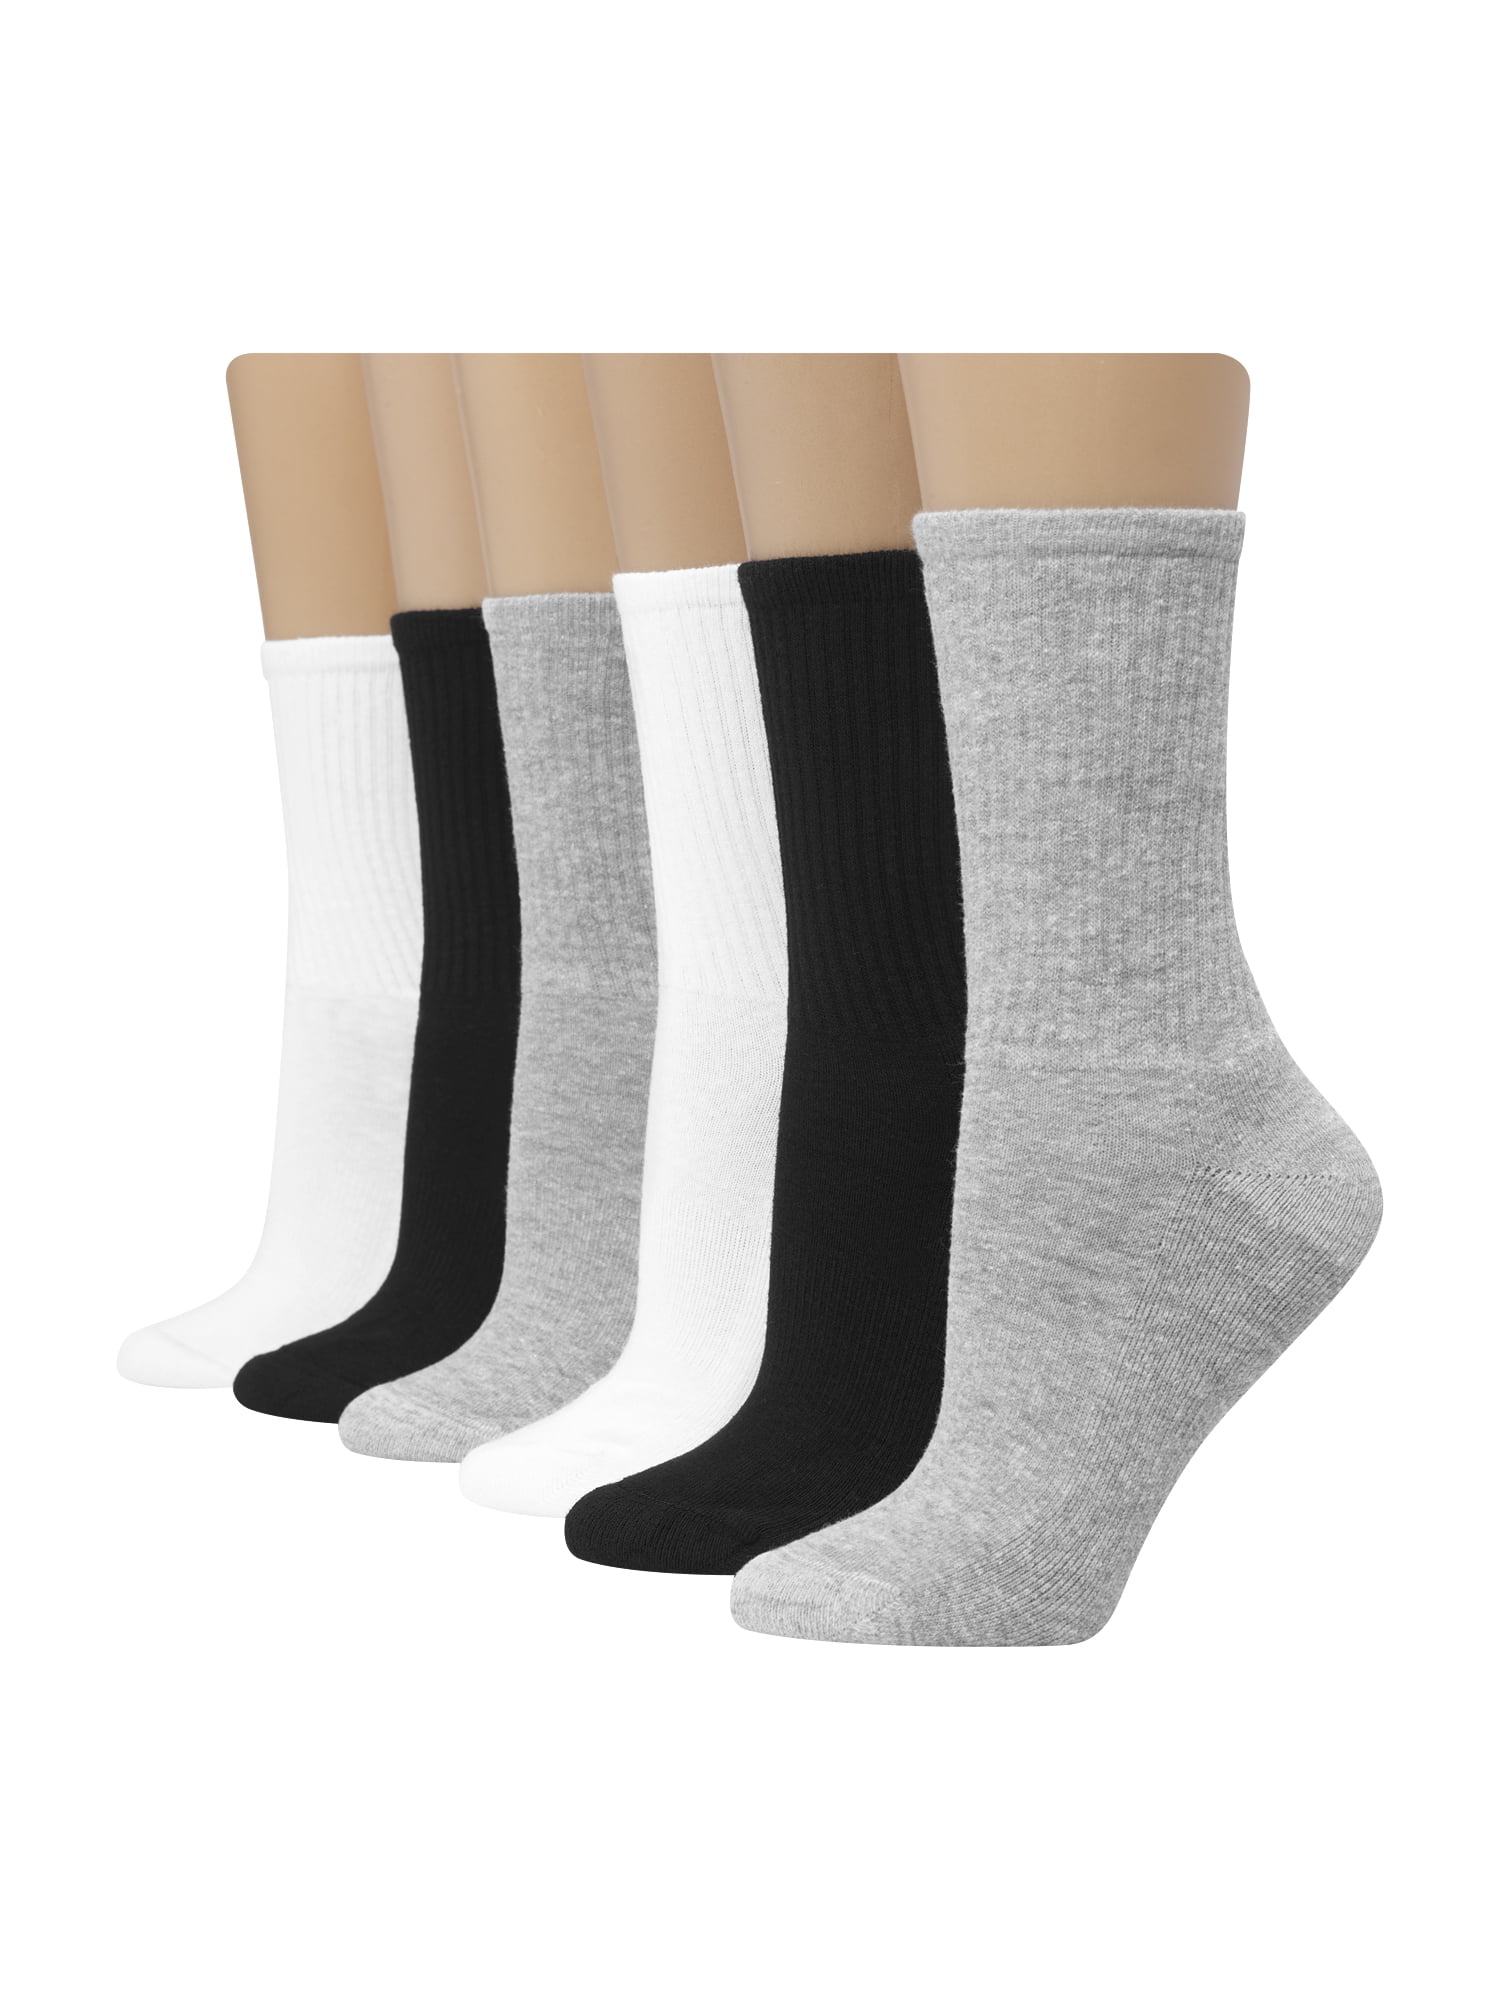 Details about   Hanes Women's ComfortSoft Crew Socks 3-Pack